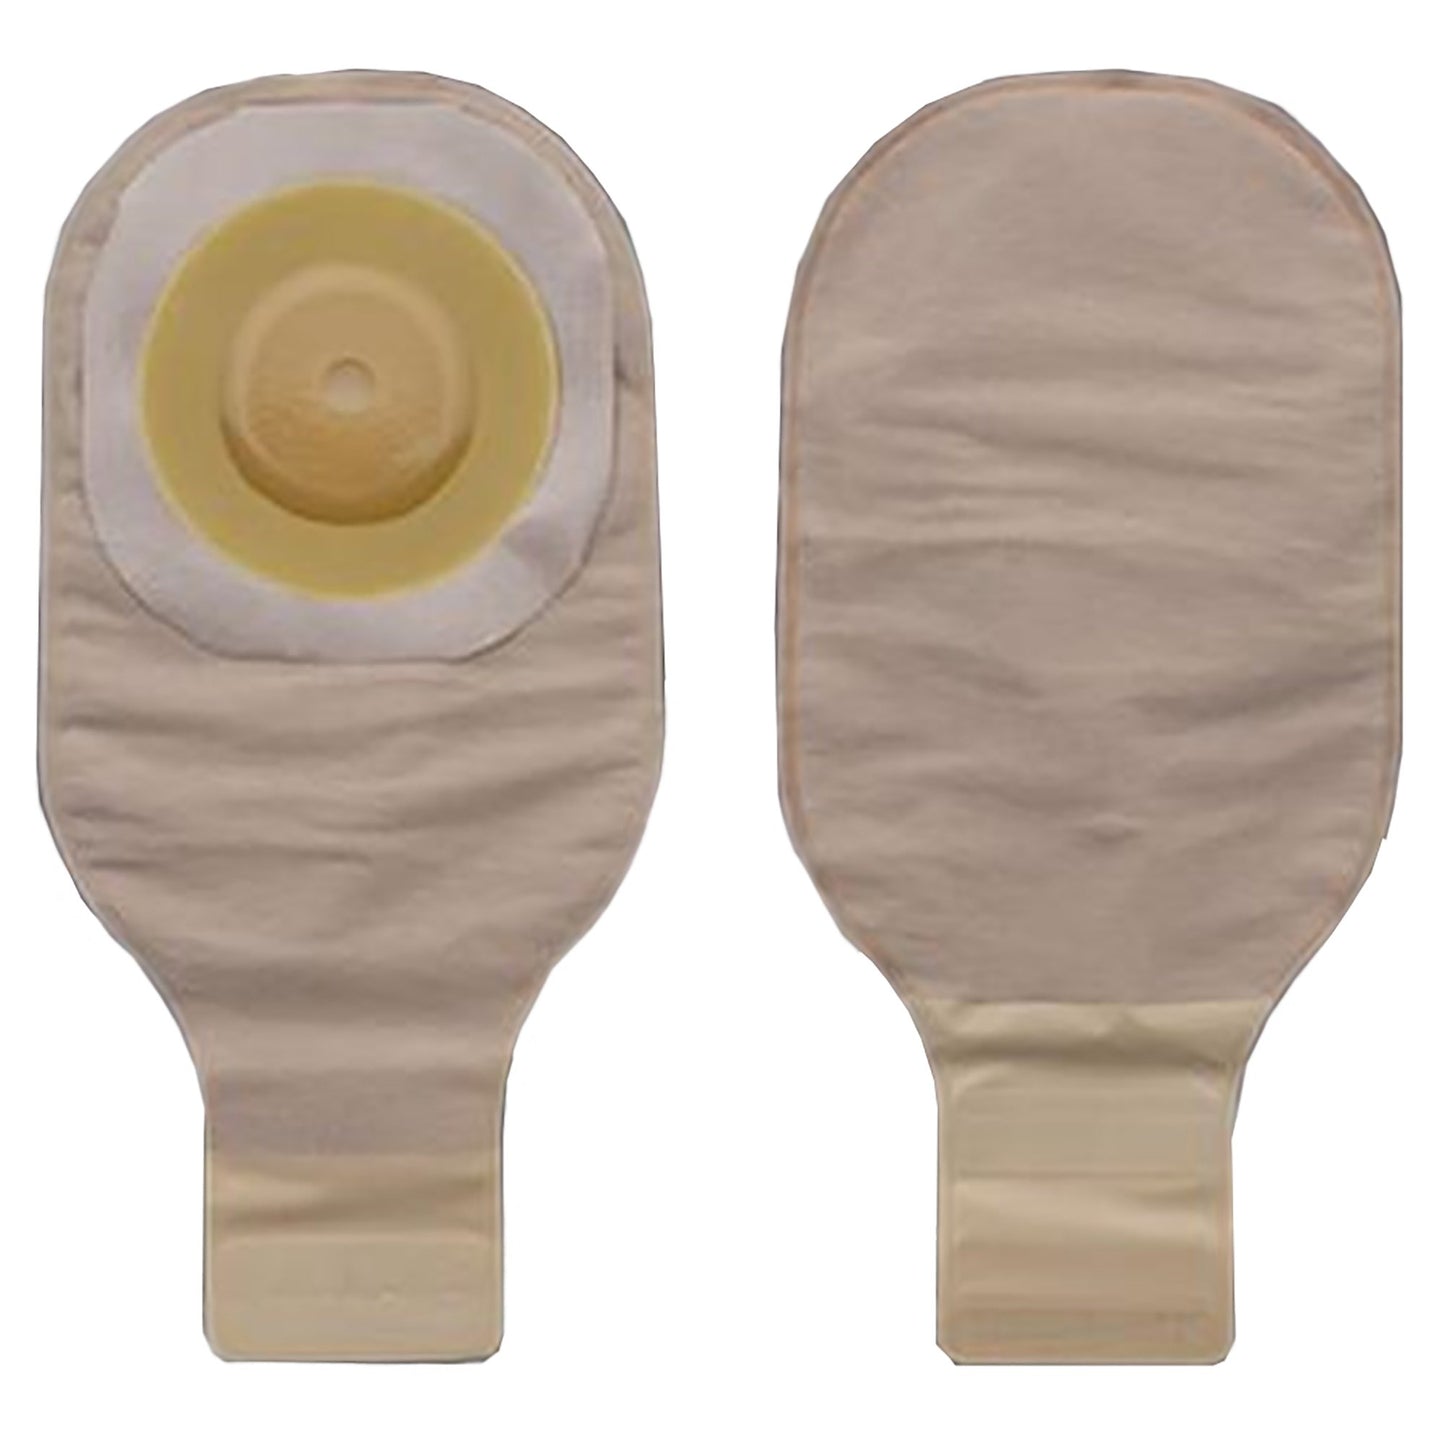 Premier™ One-Piece Drainable Beige Colostomy Pouch, 12 Inch Length, 2 Inch Flange, 5 ct